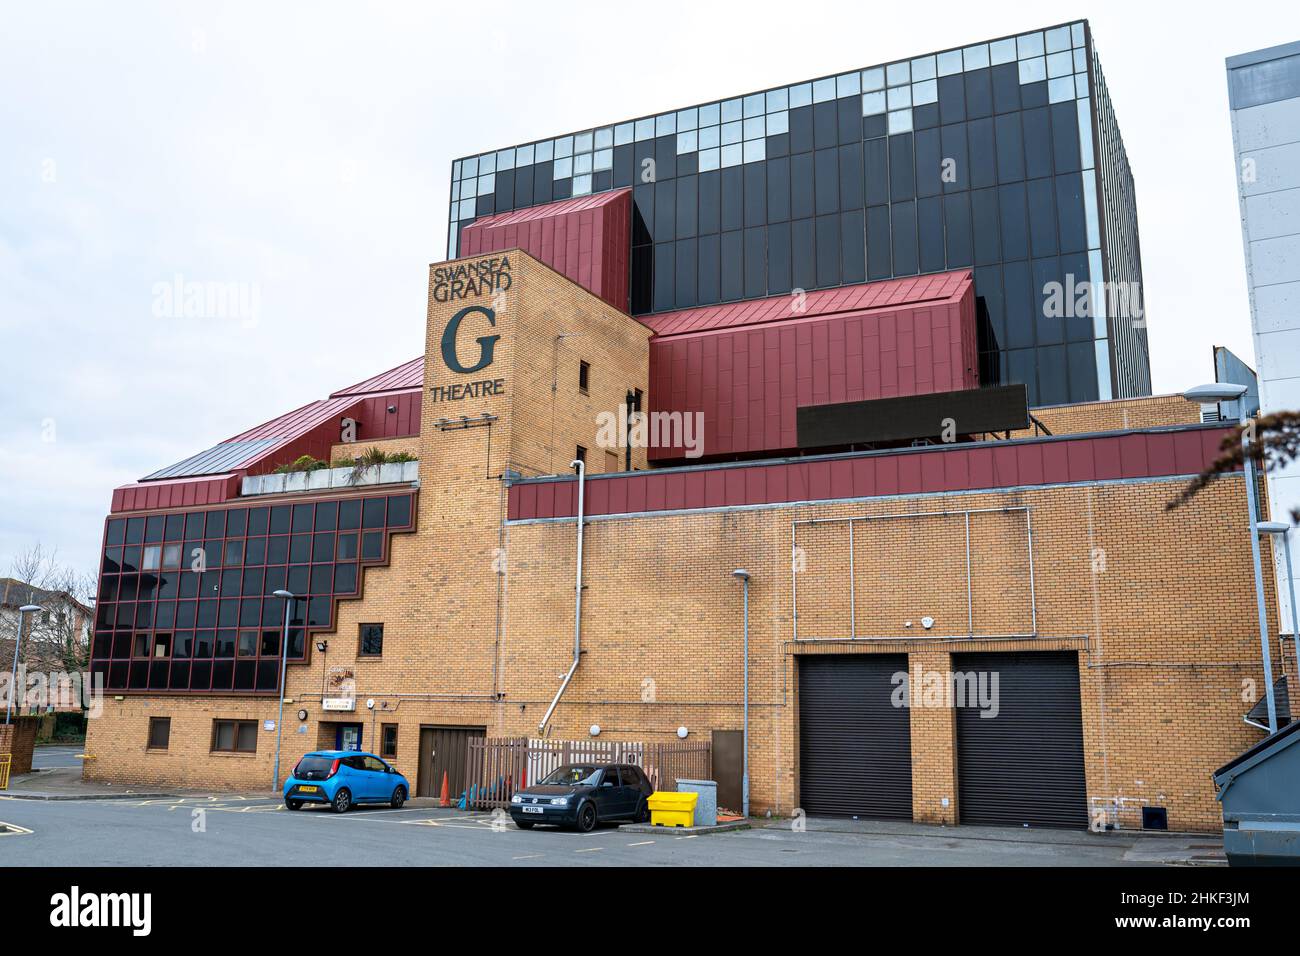 Swansea Grand Theatre building. South Wales, the United Kingdom - January 16, 2022 Stock Photo